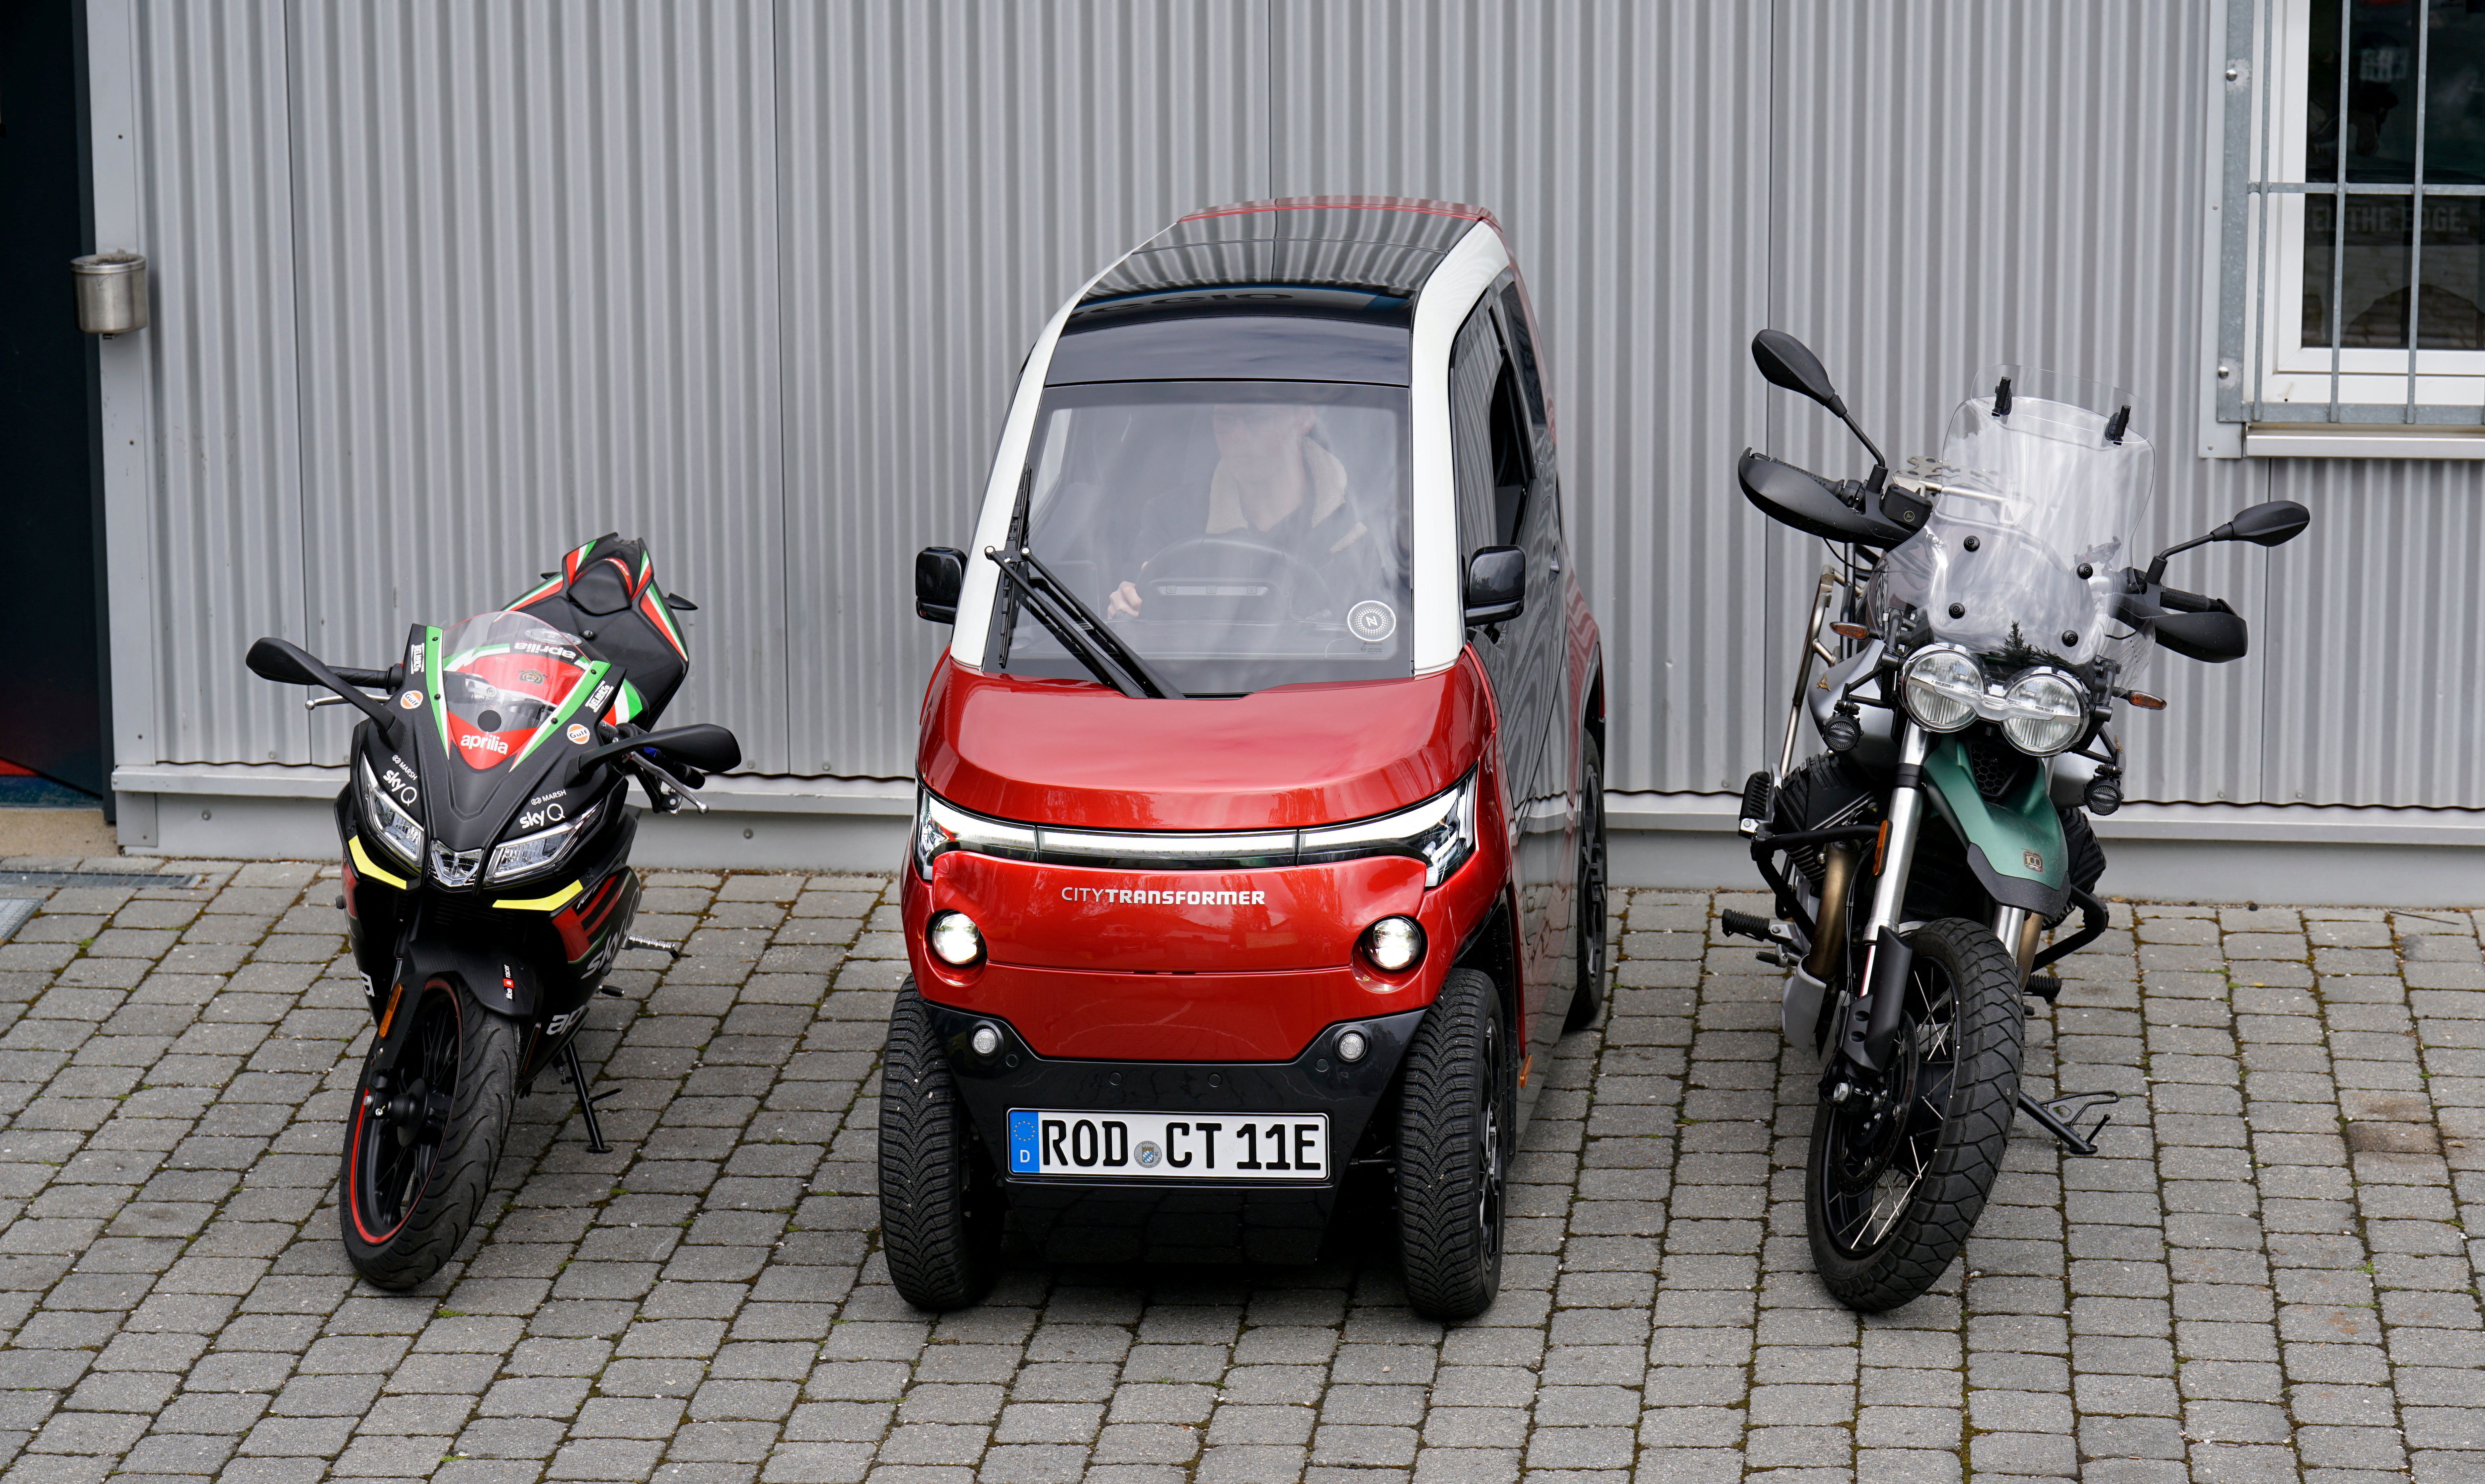 An urban electric vehicle designed by Israeli startup City Transformer